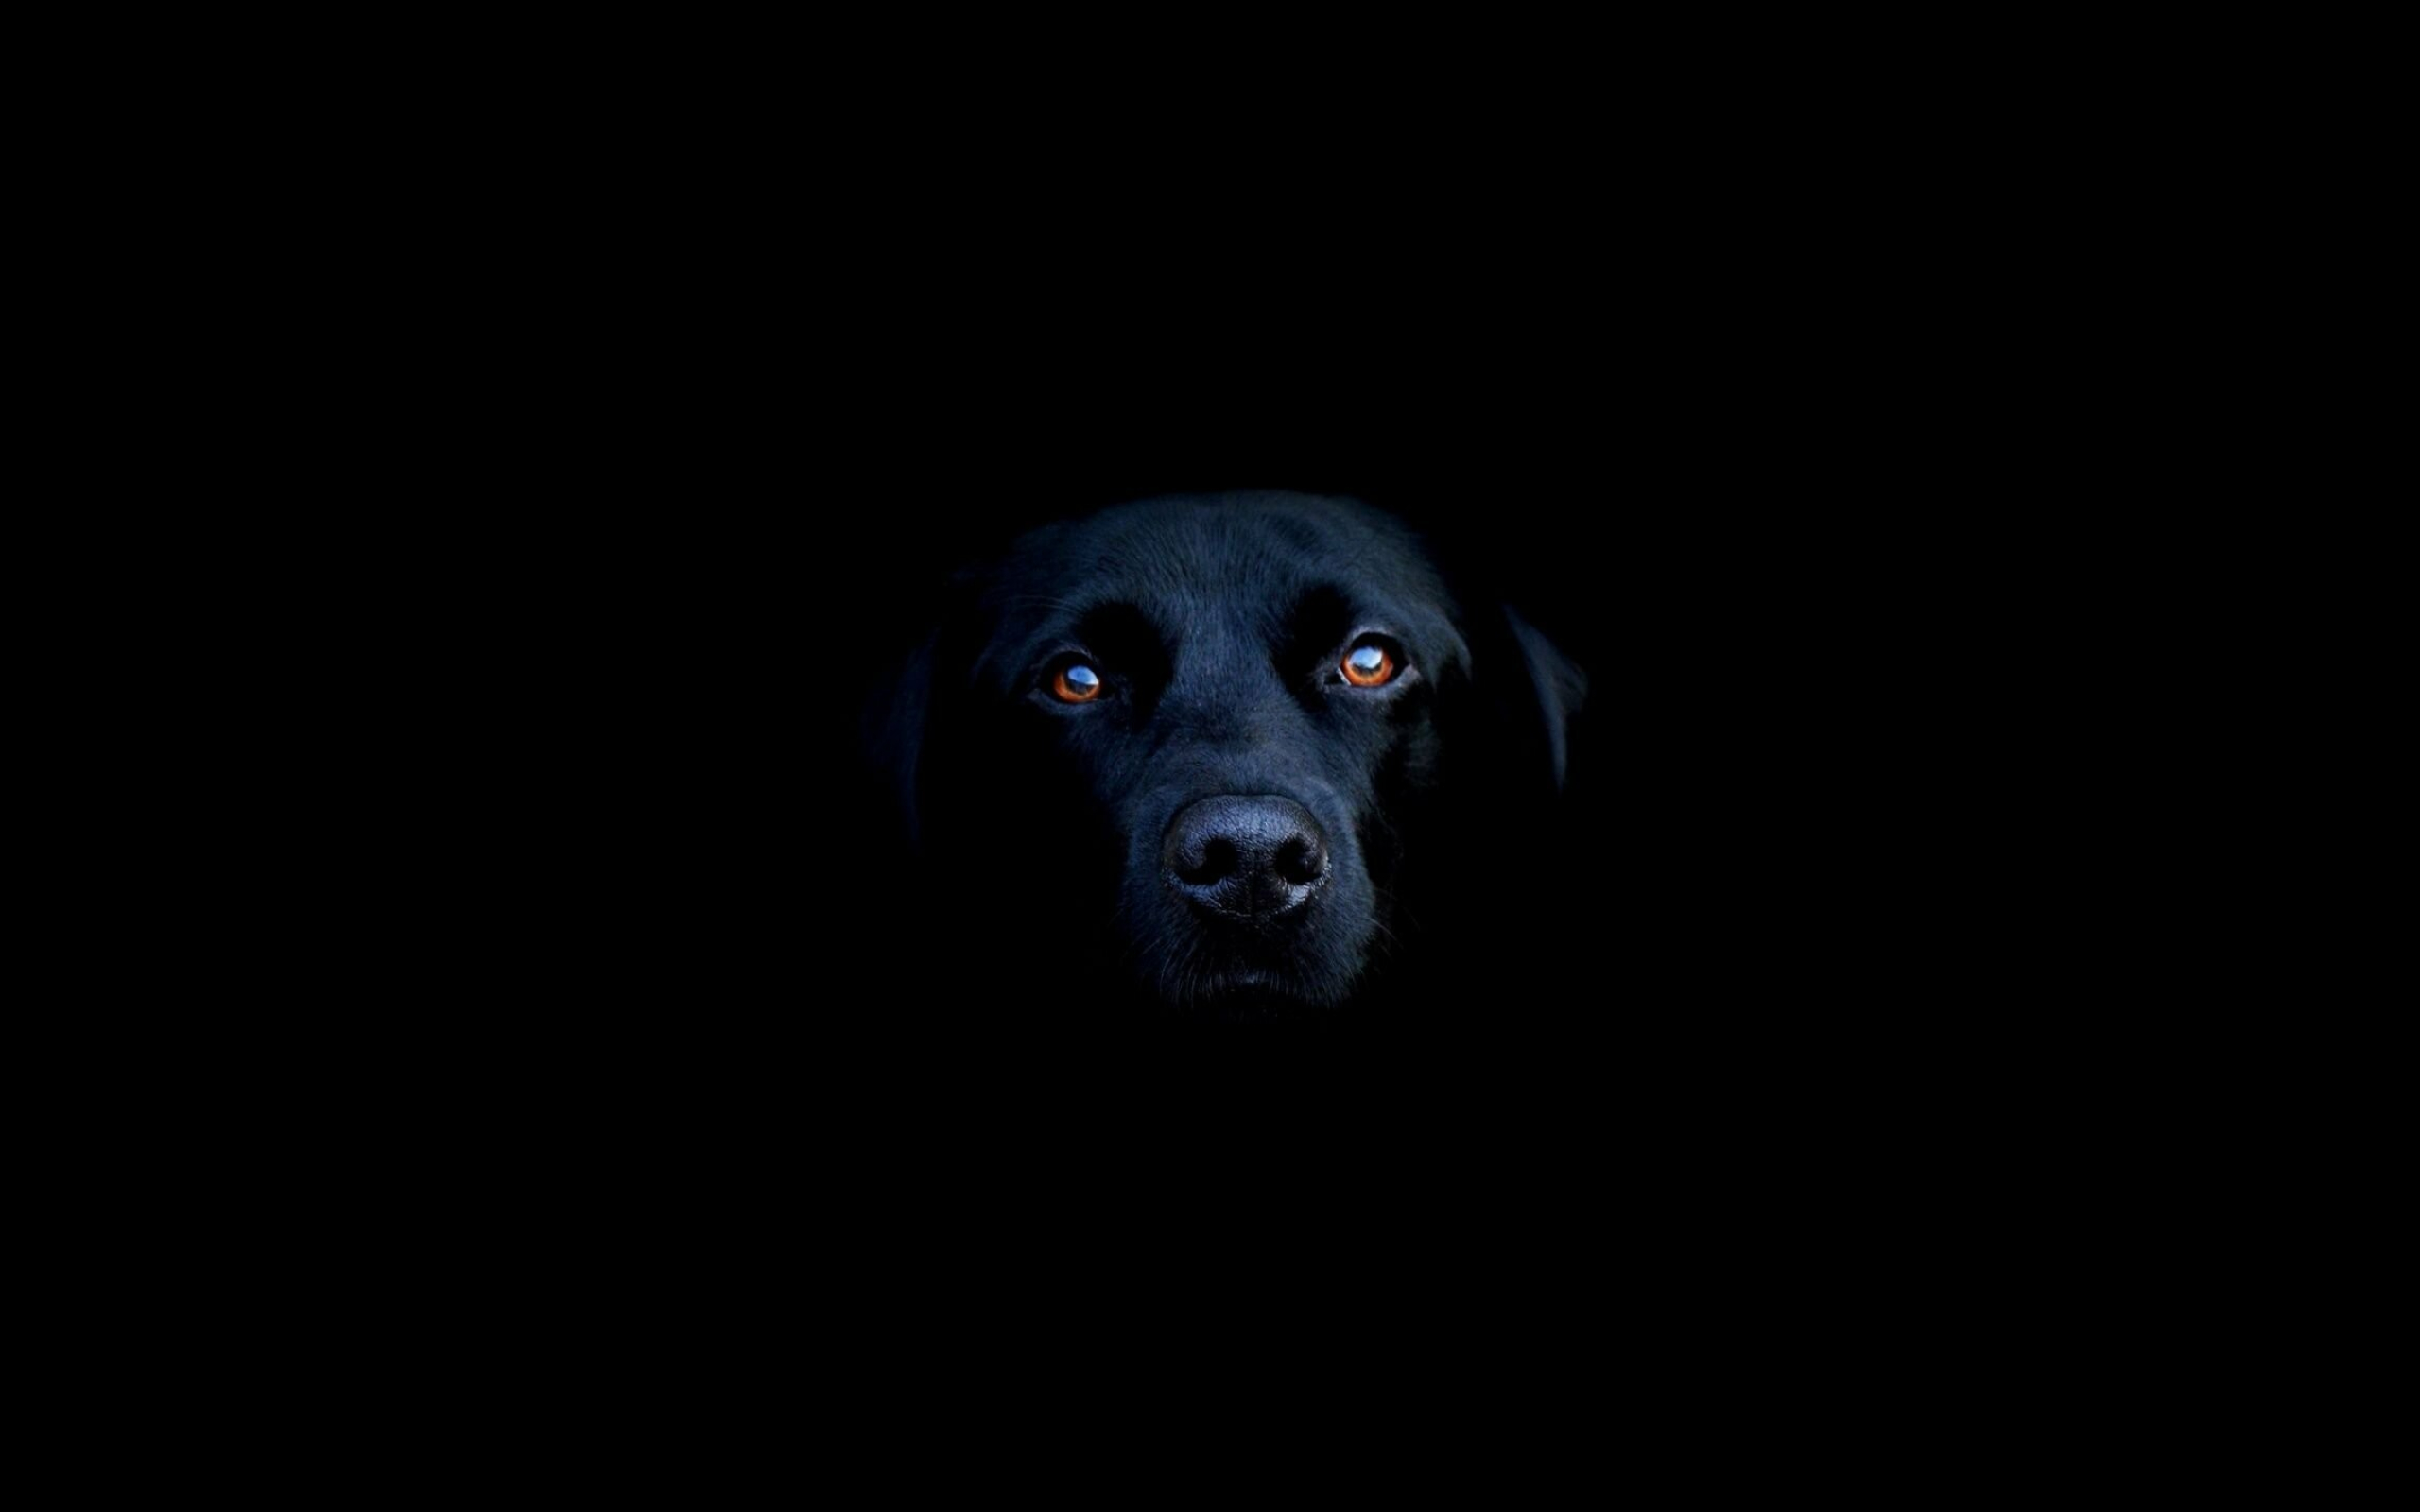 Labrador Retriever: The breed is used in water rescue/lifesaving. 2560x1600 HD Wallpaper.